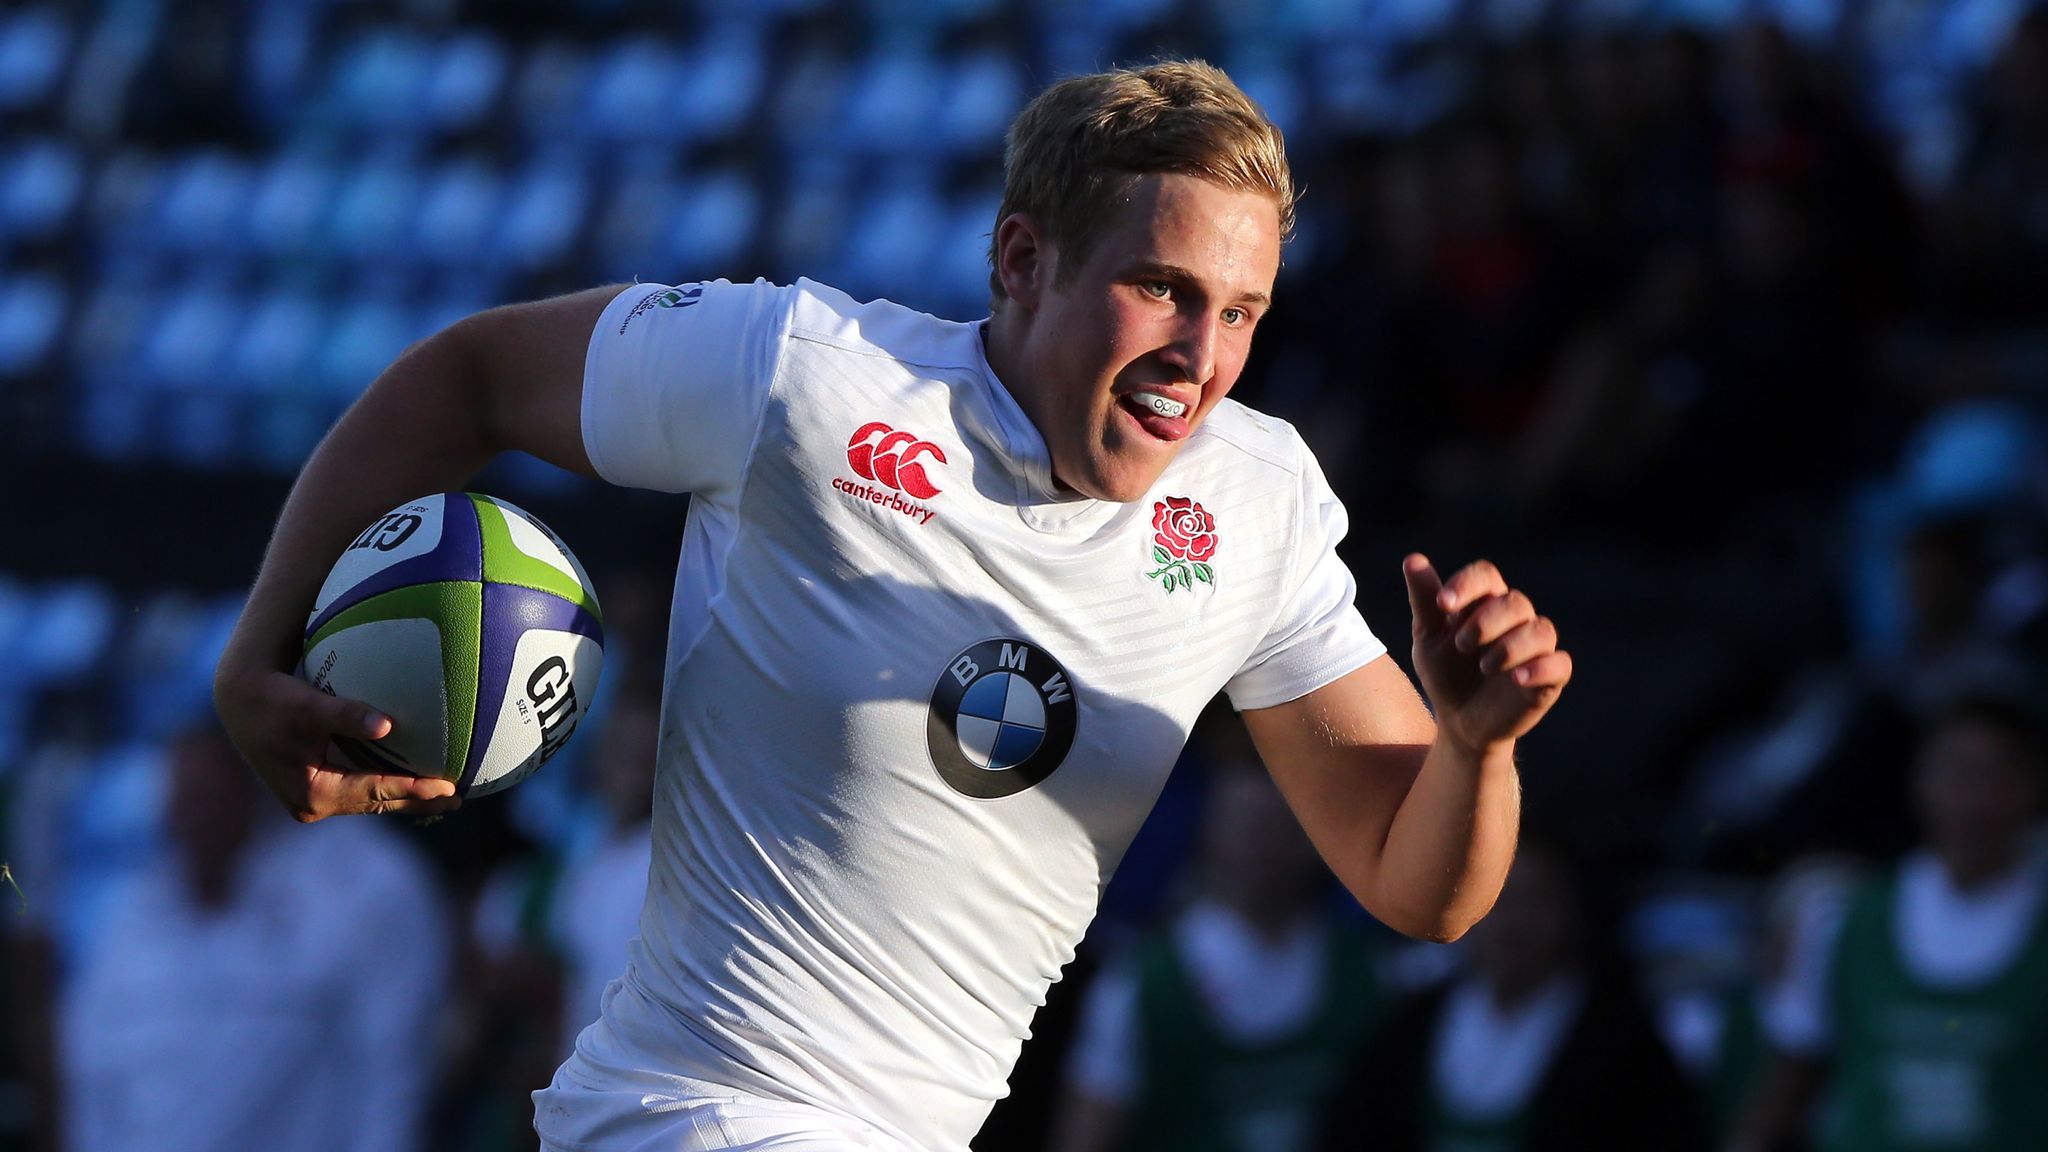 England v Ireland Six players to watch in World Rugby U20 final Rugby Union News Sky Sports